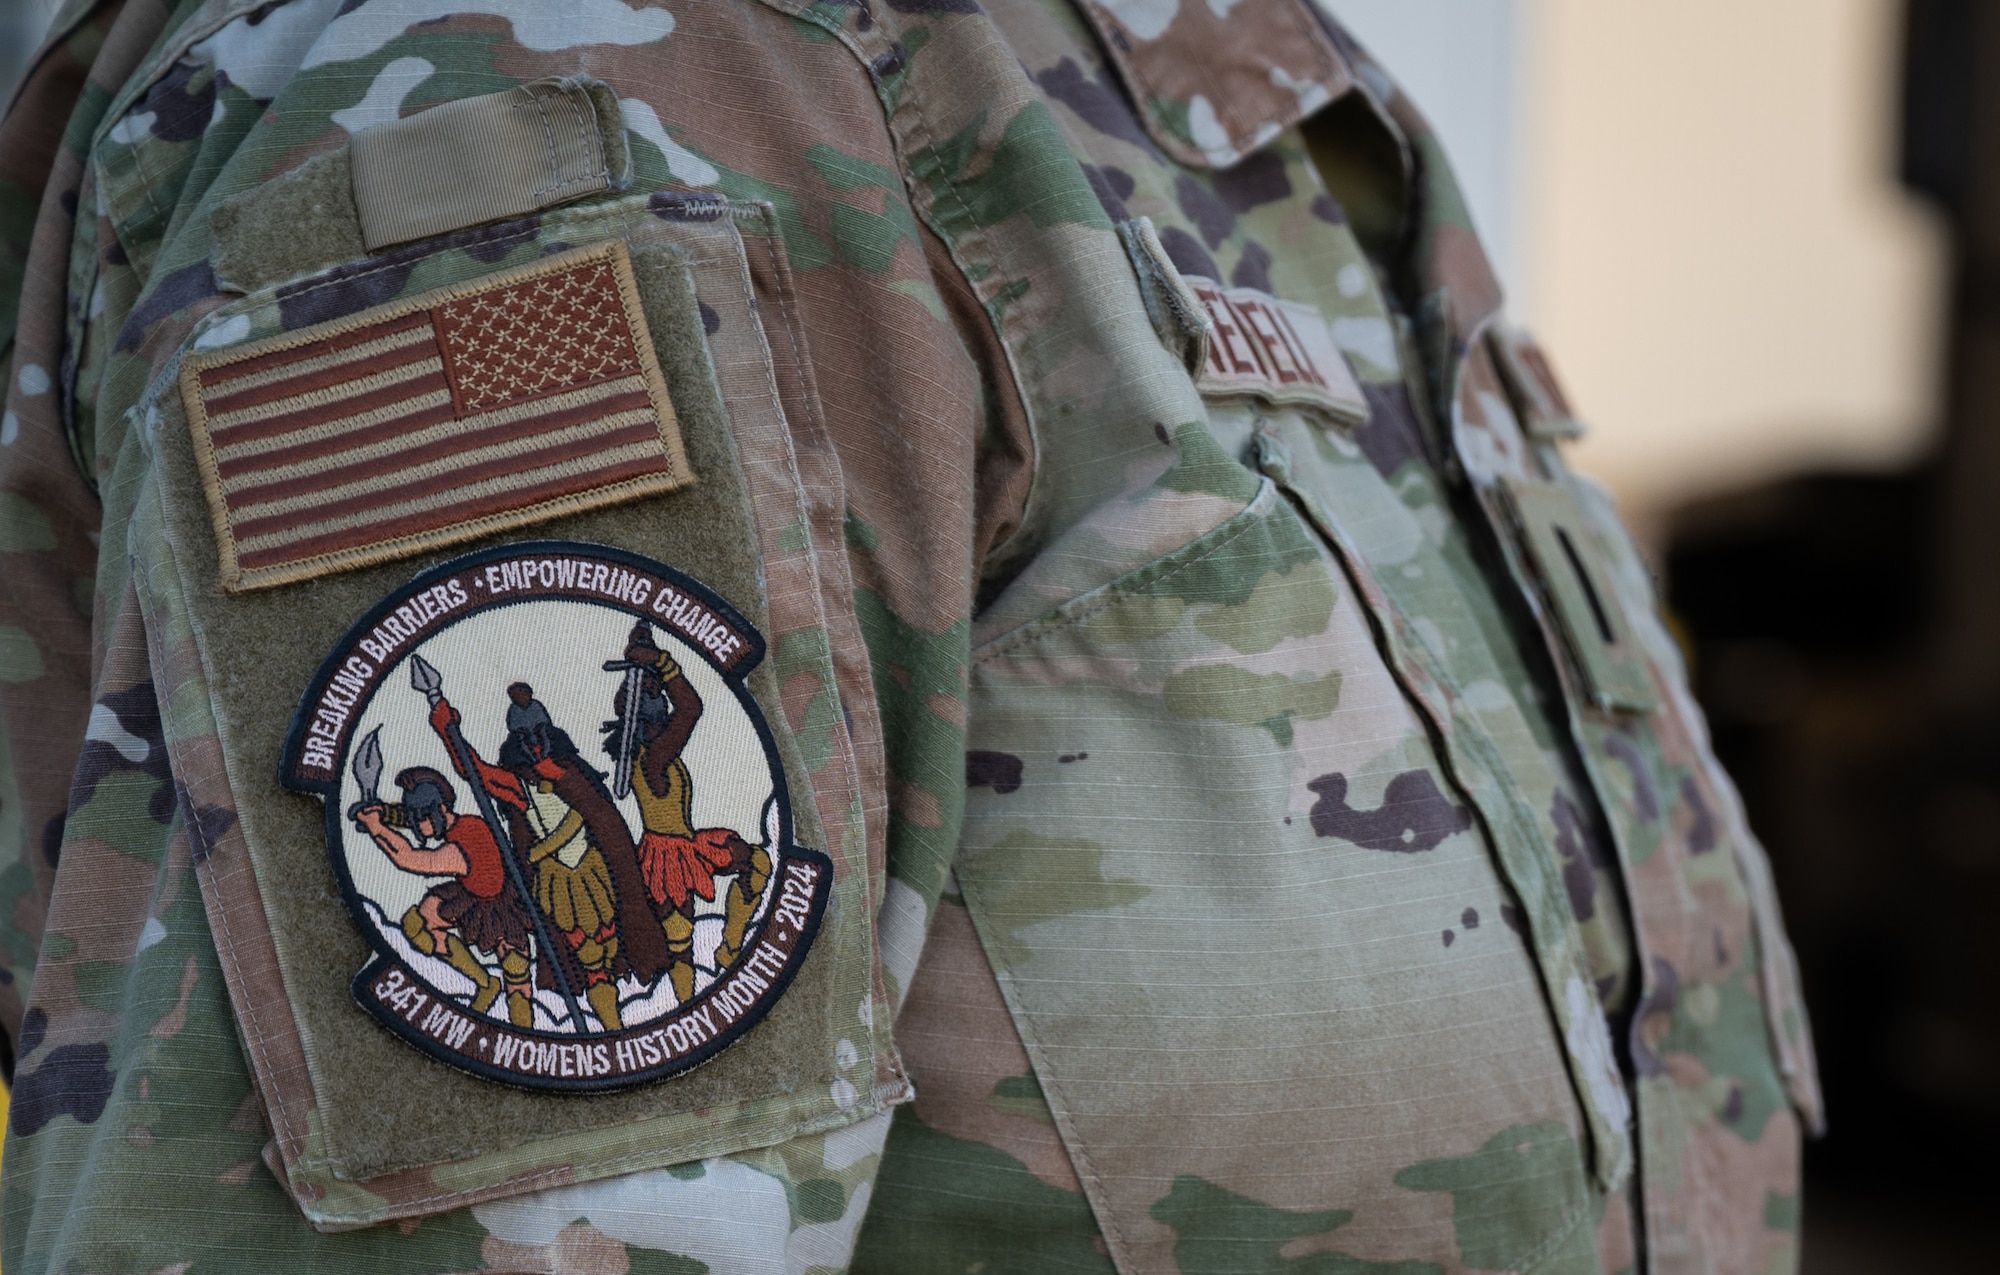 The side view of a person in military uniform is shown, focusing on their upper torso and right sleeve. On the sleeve is a circular velcro patch depicting three Spartan women charging into battle, surrounded by text that reads: "BREAKING BARRIERS - EMPOWERING CHANGE - 341 MW - WOMENS HISTORY MONTH - 2024"